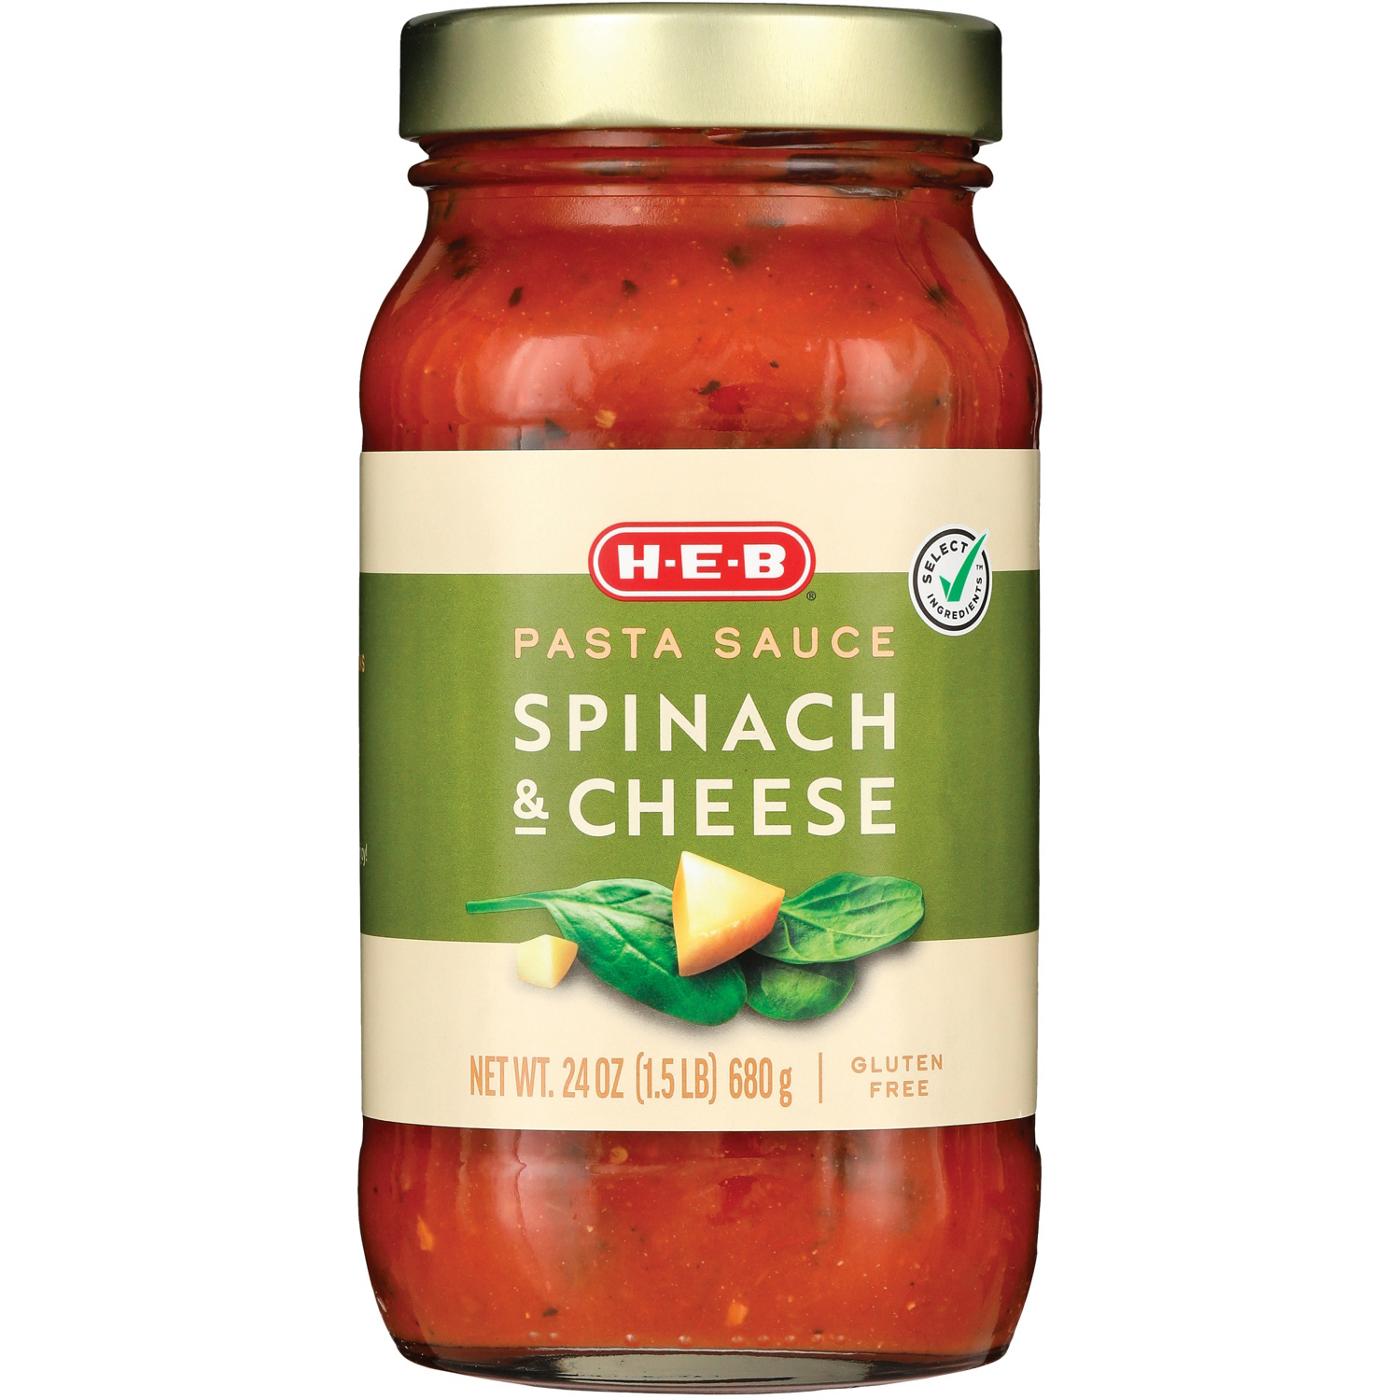 H-E-B Spinach & Cheese Pasta Sauce; image 1 of 2